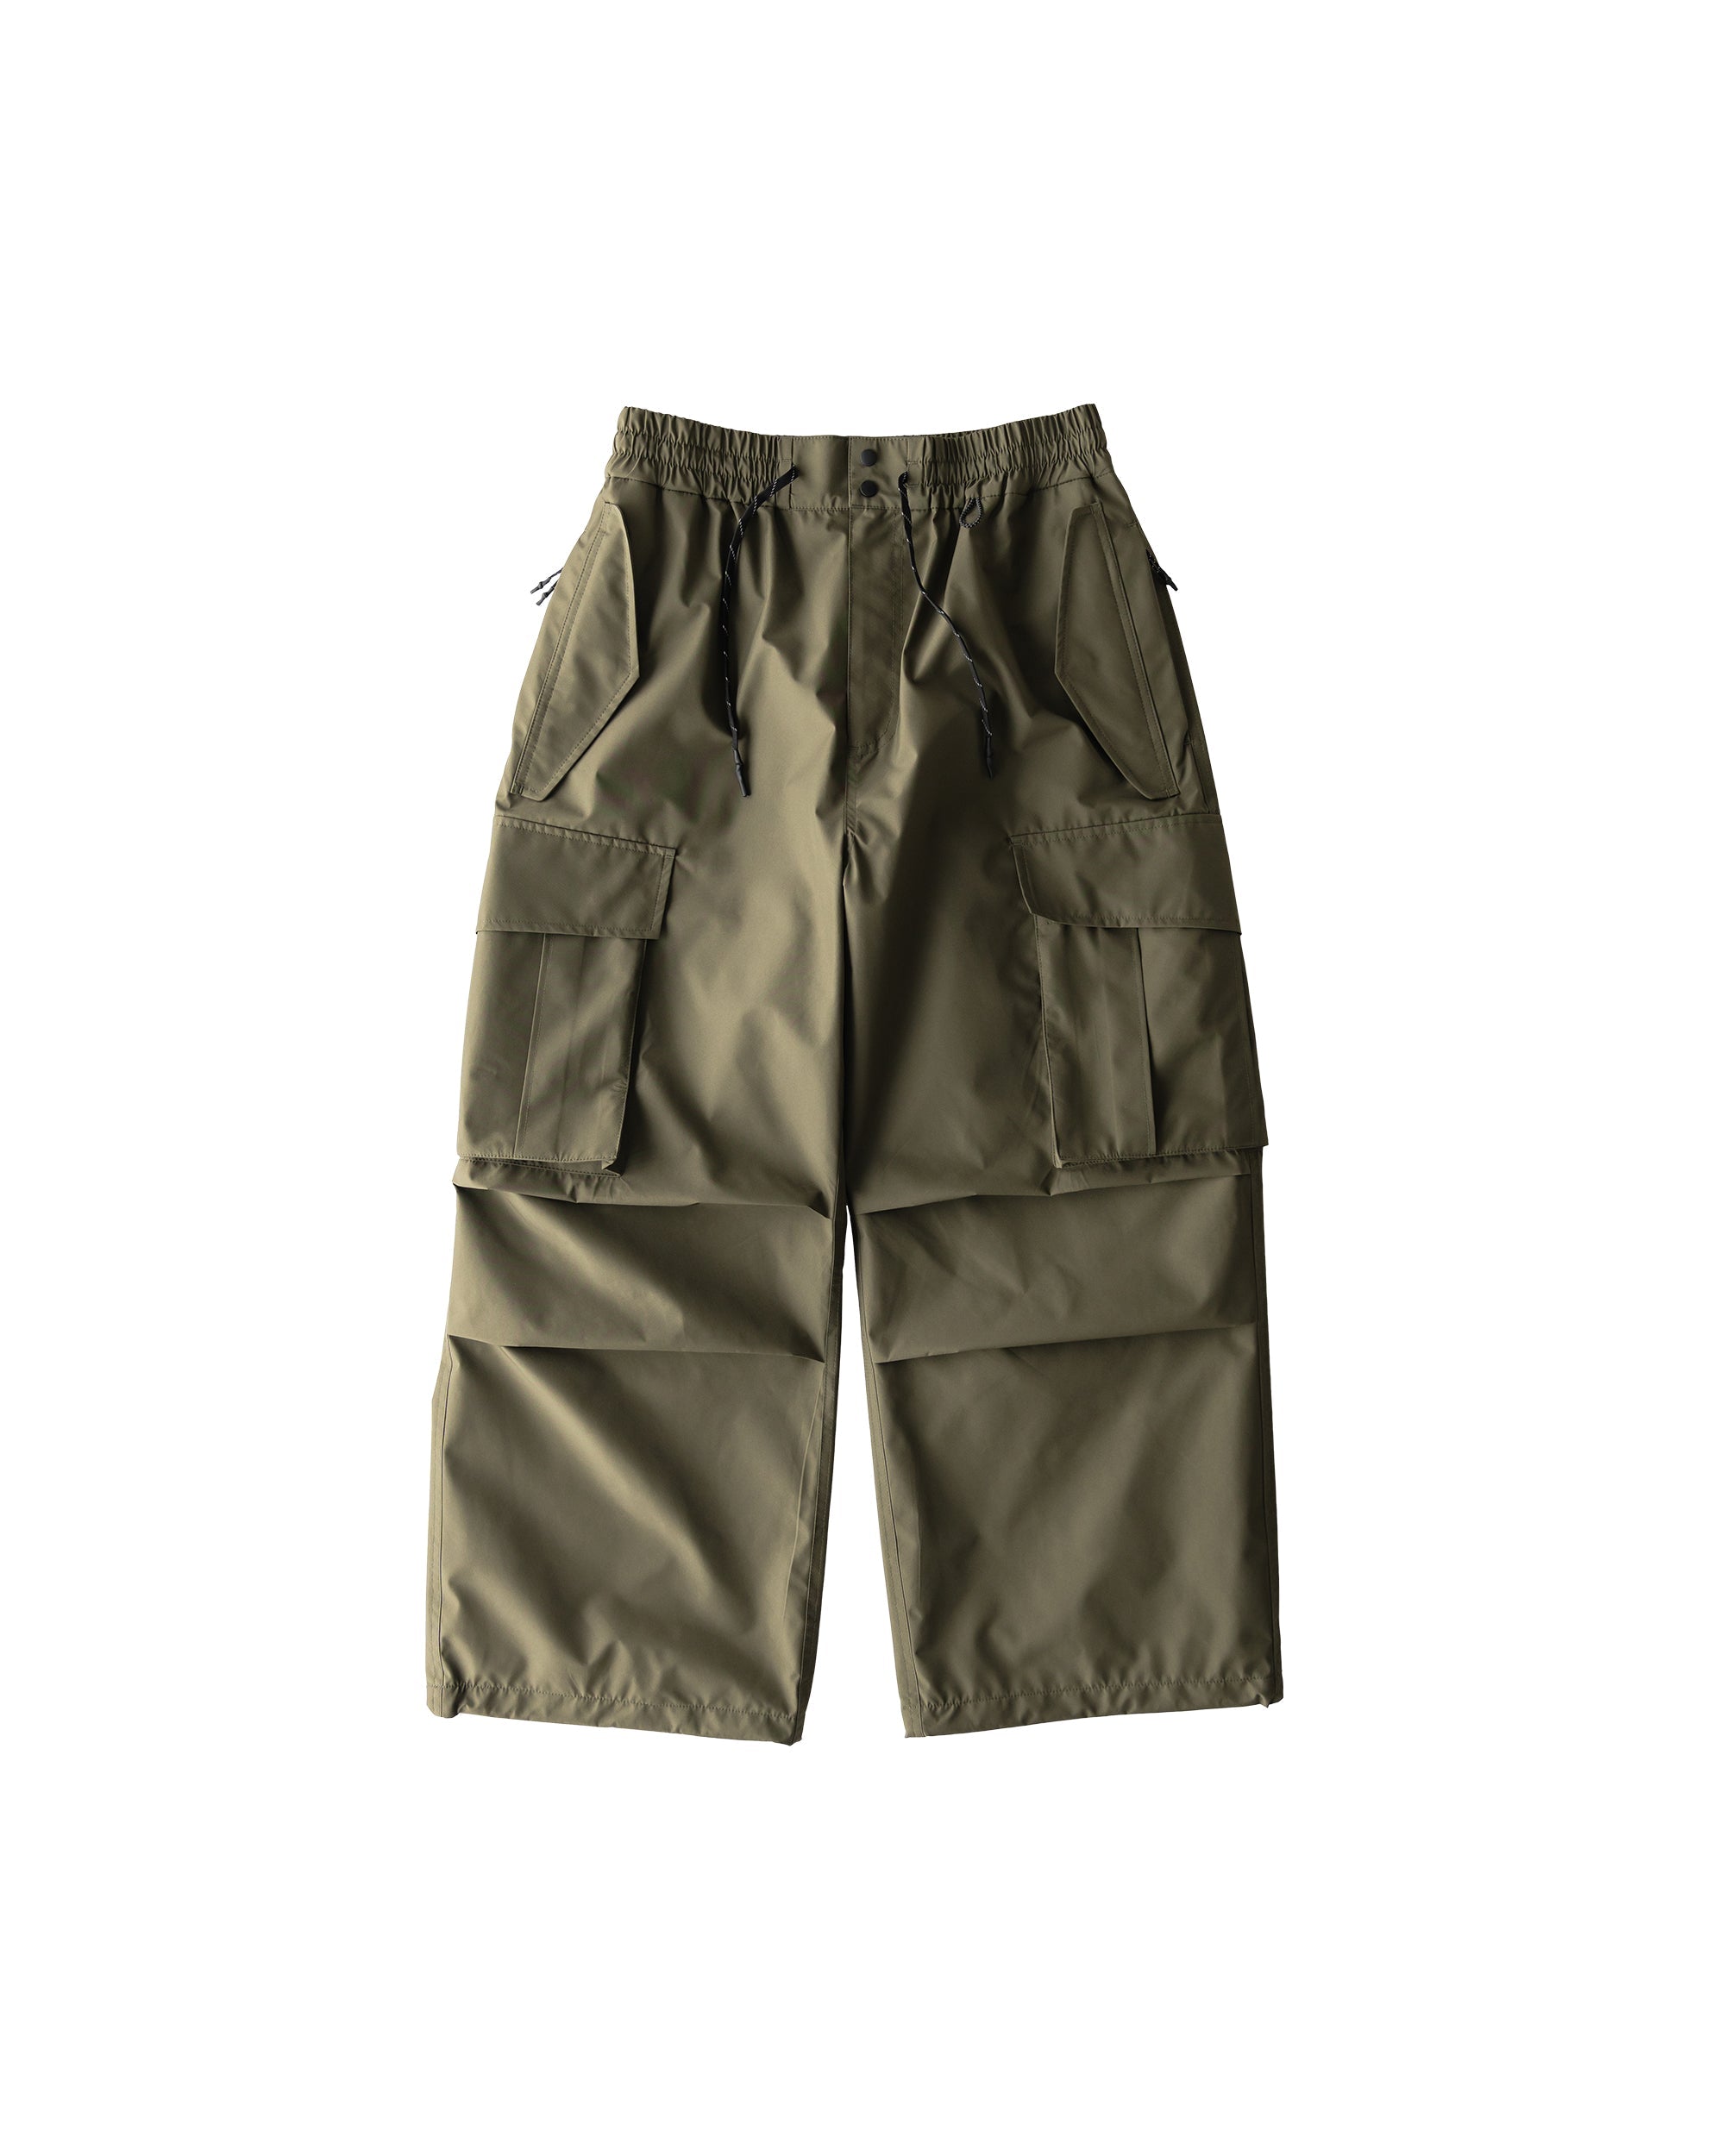 【3.6 wed 20:00- Pre-order】+phenix WINDSTOPPER® by GORE-TEX LABS CITY  MILITARY PANTS.